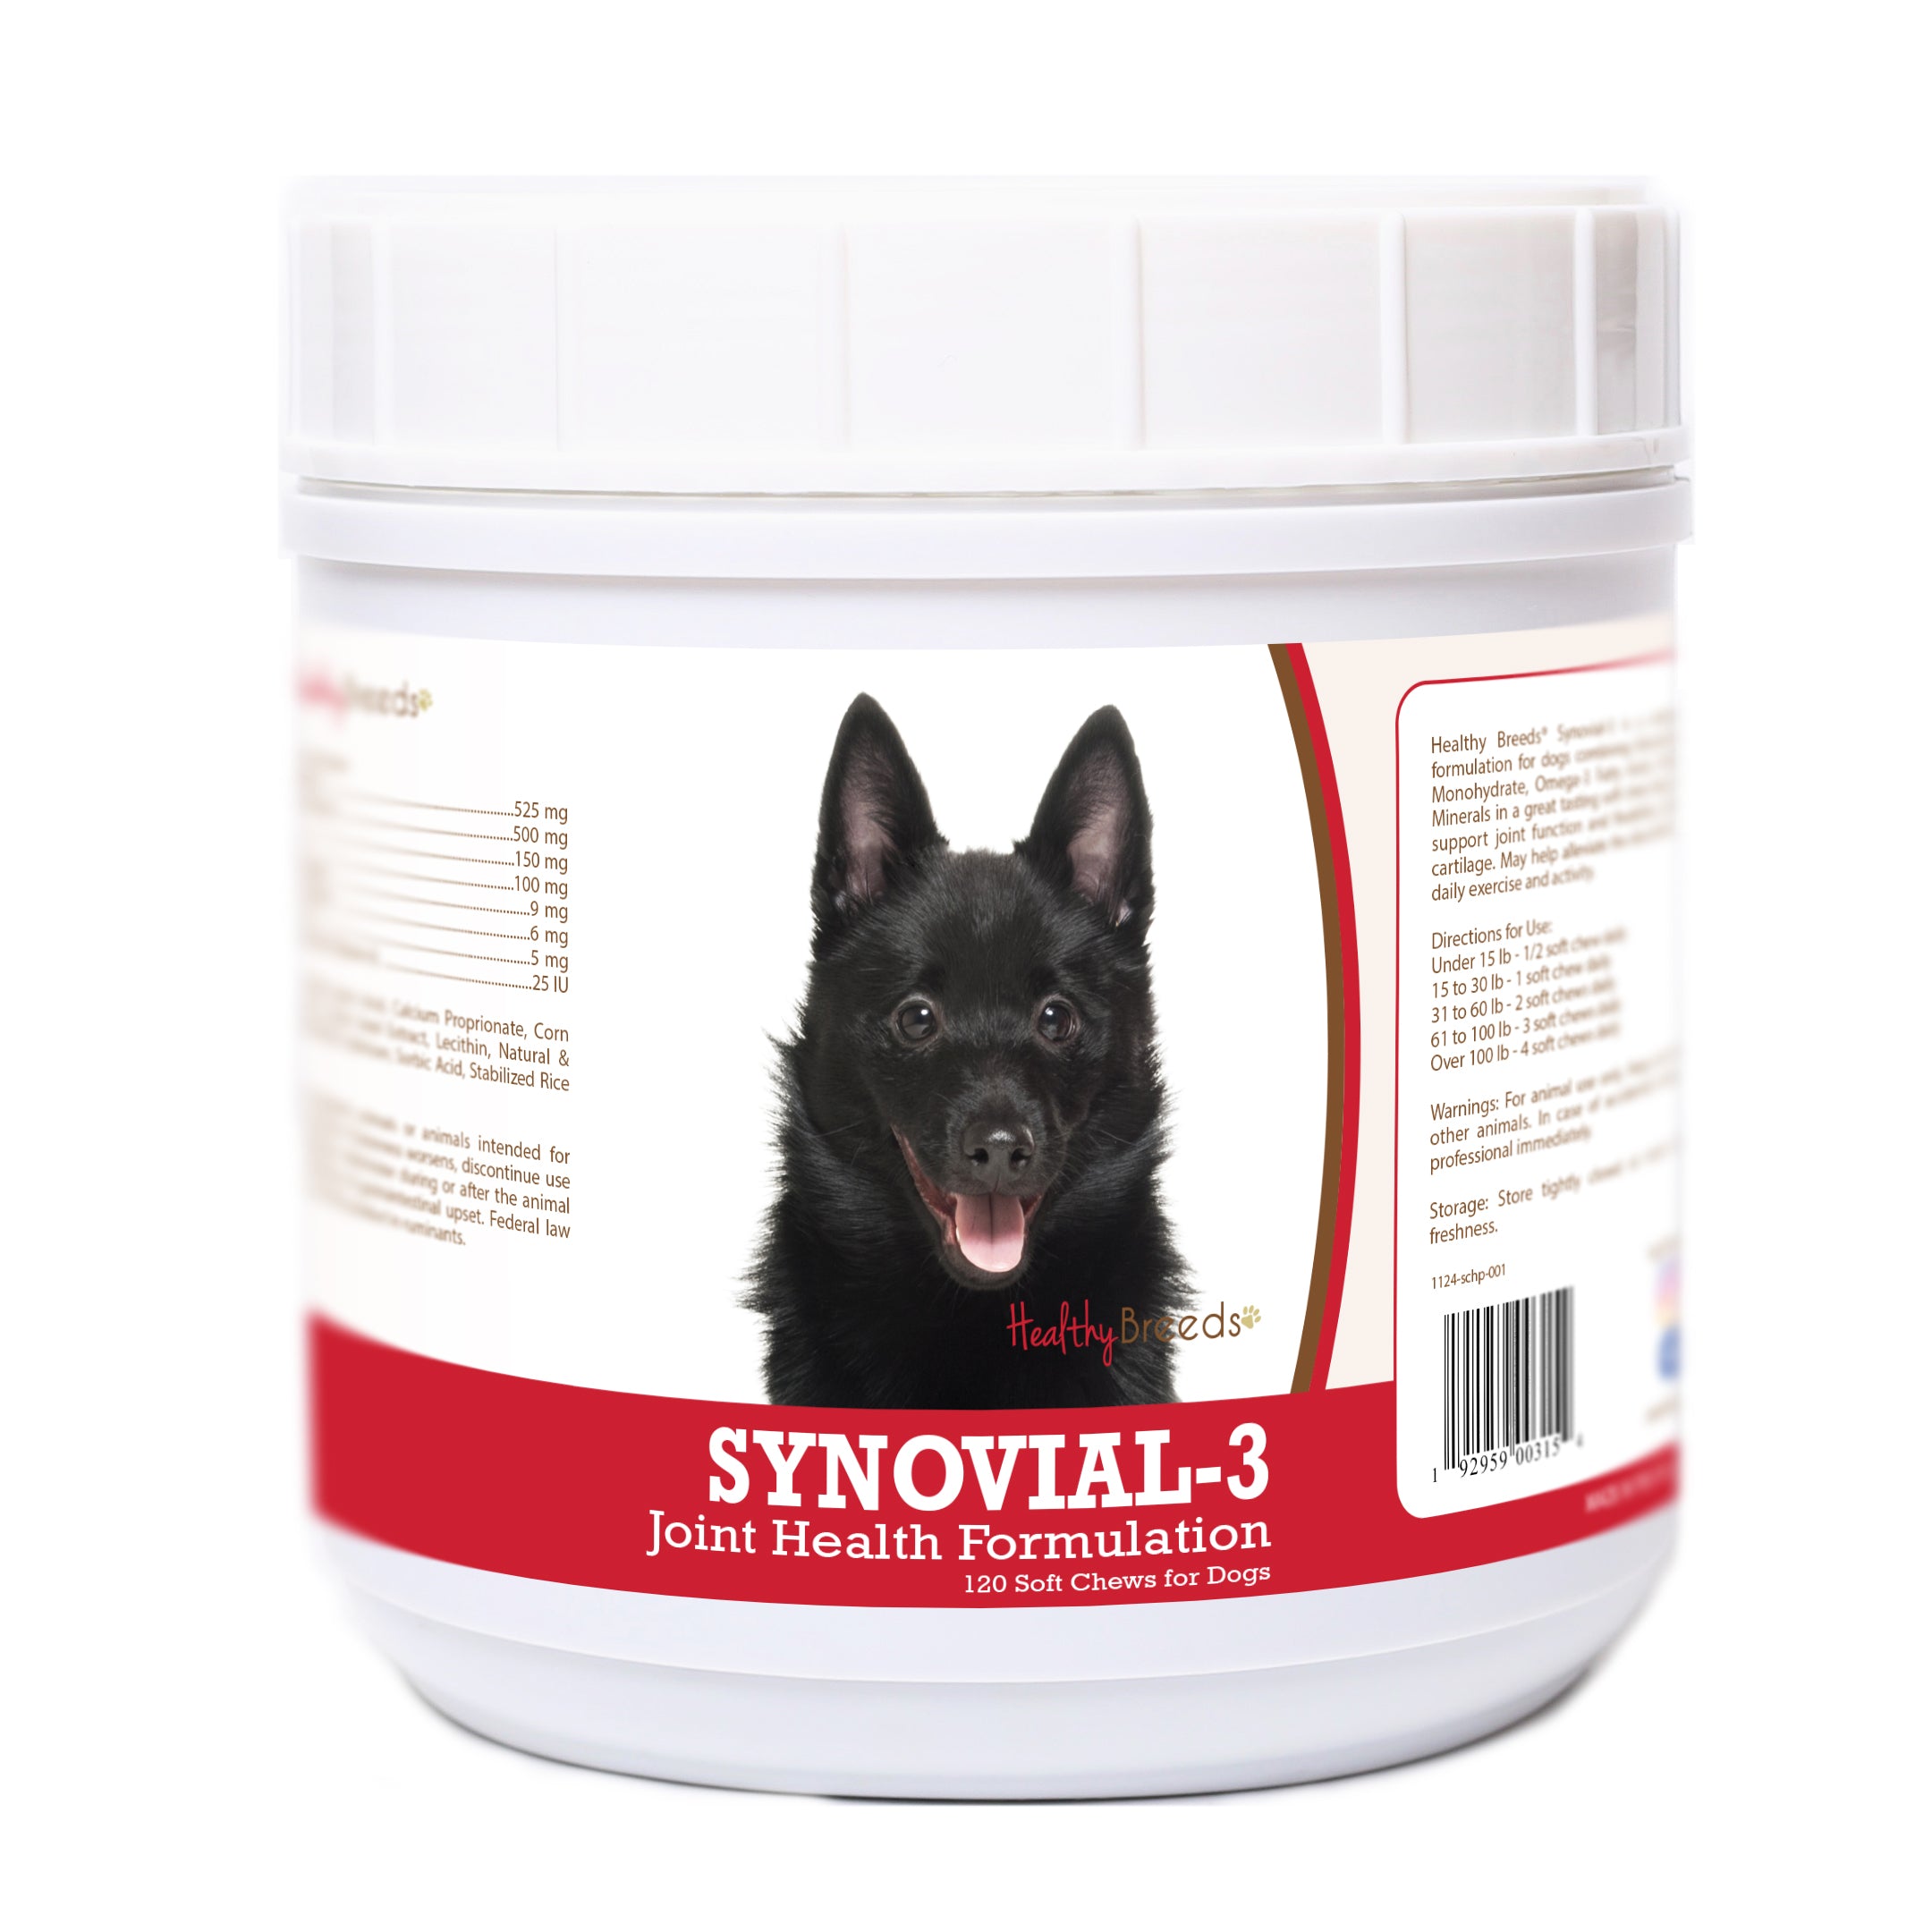 Schipperke Synovial-3 Joint Health Formulation Soft Chews 120 Count